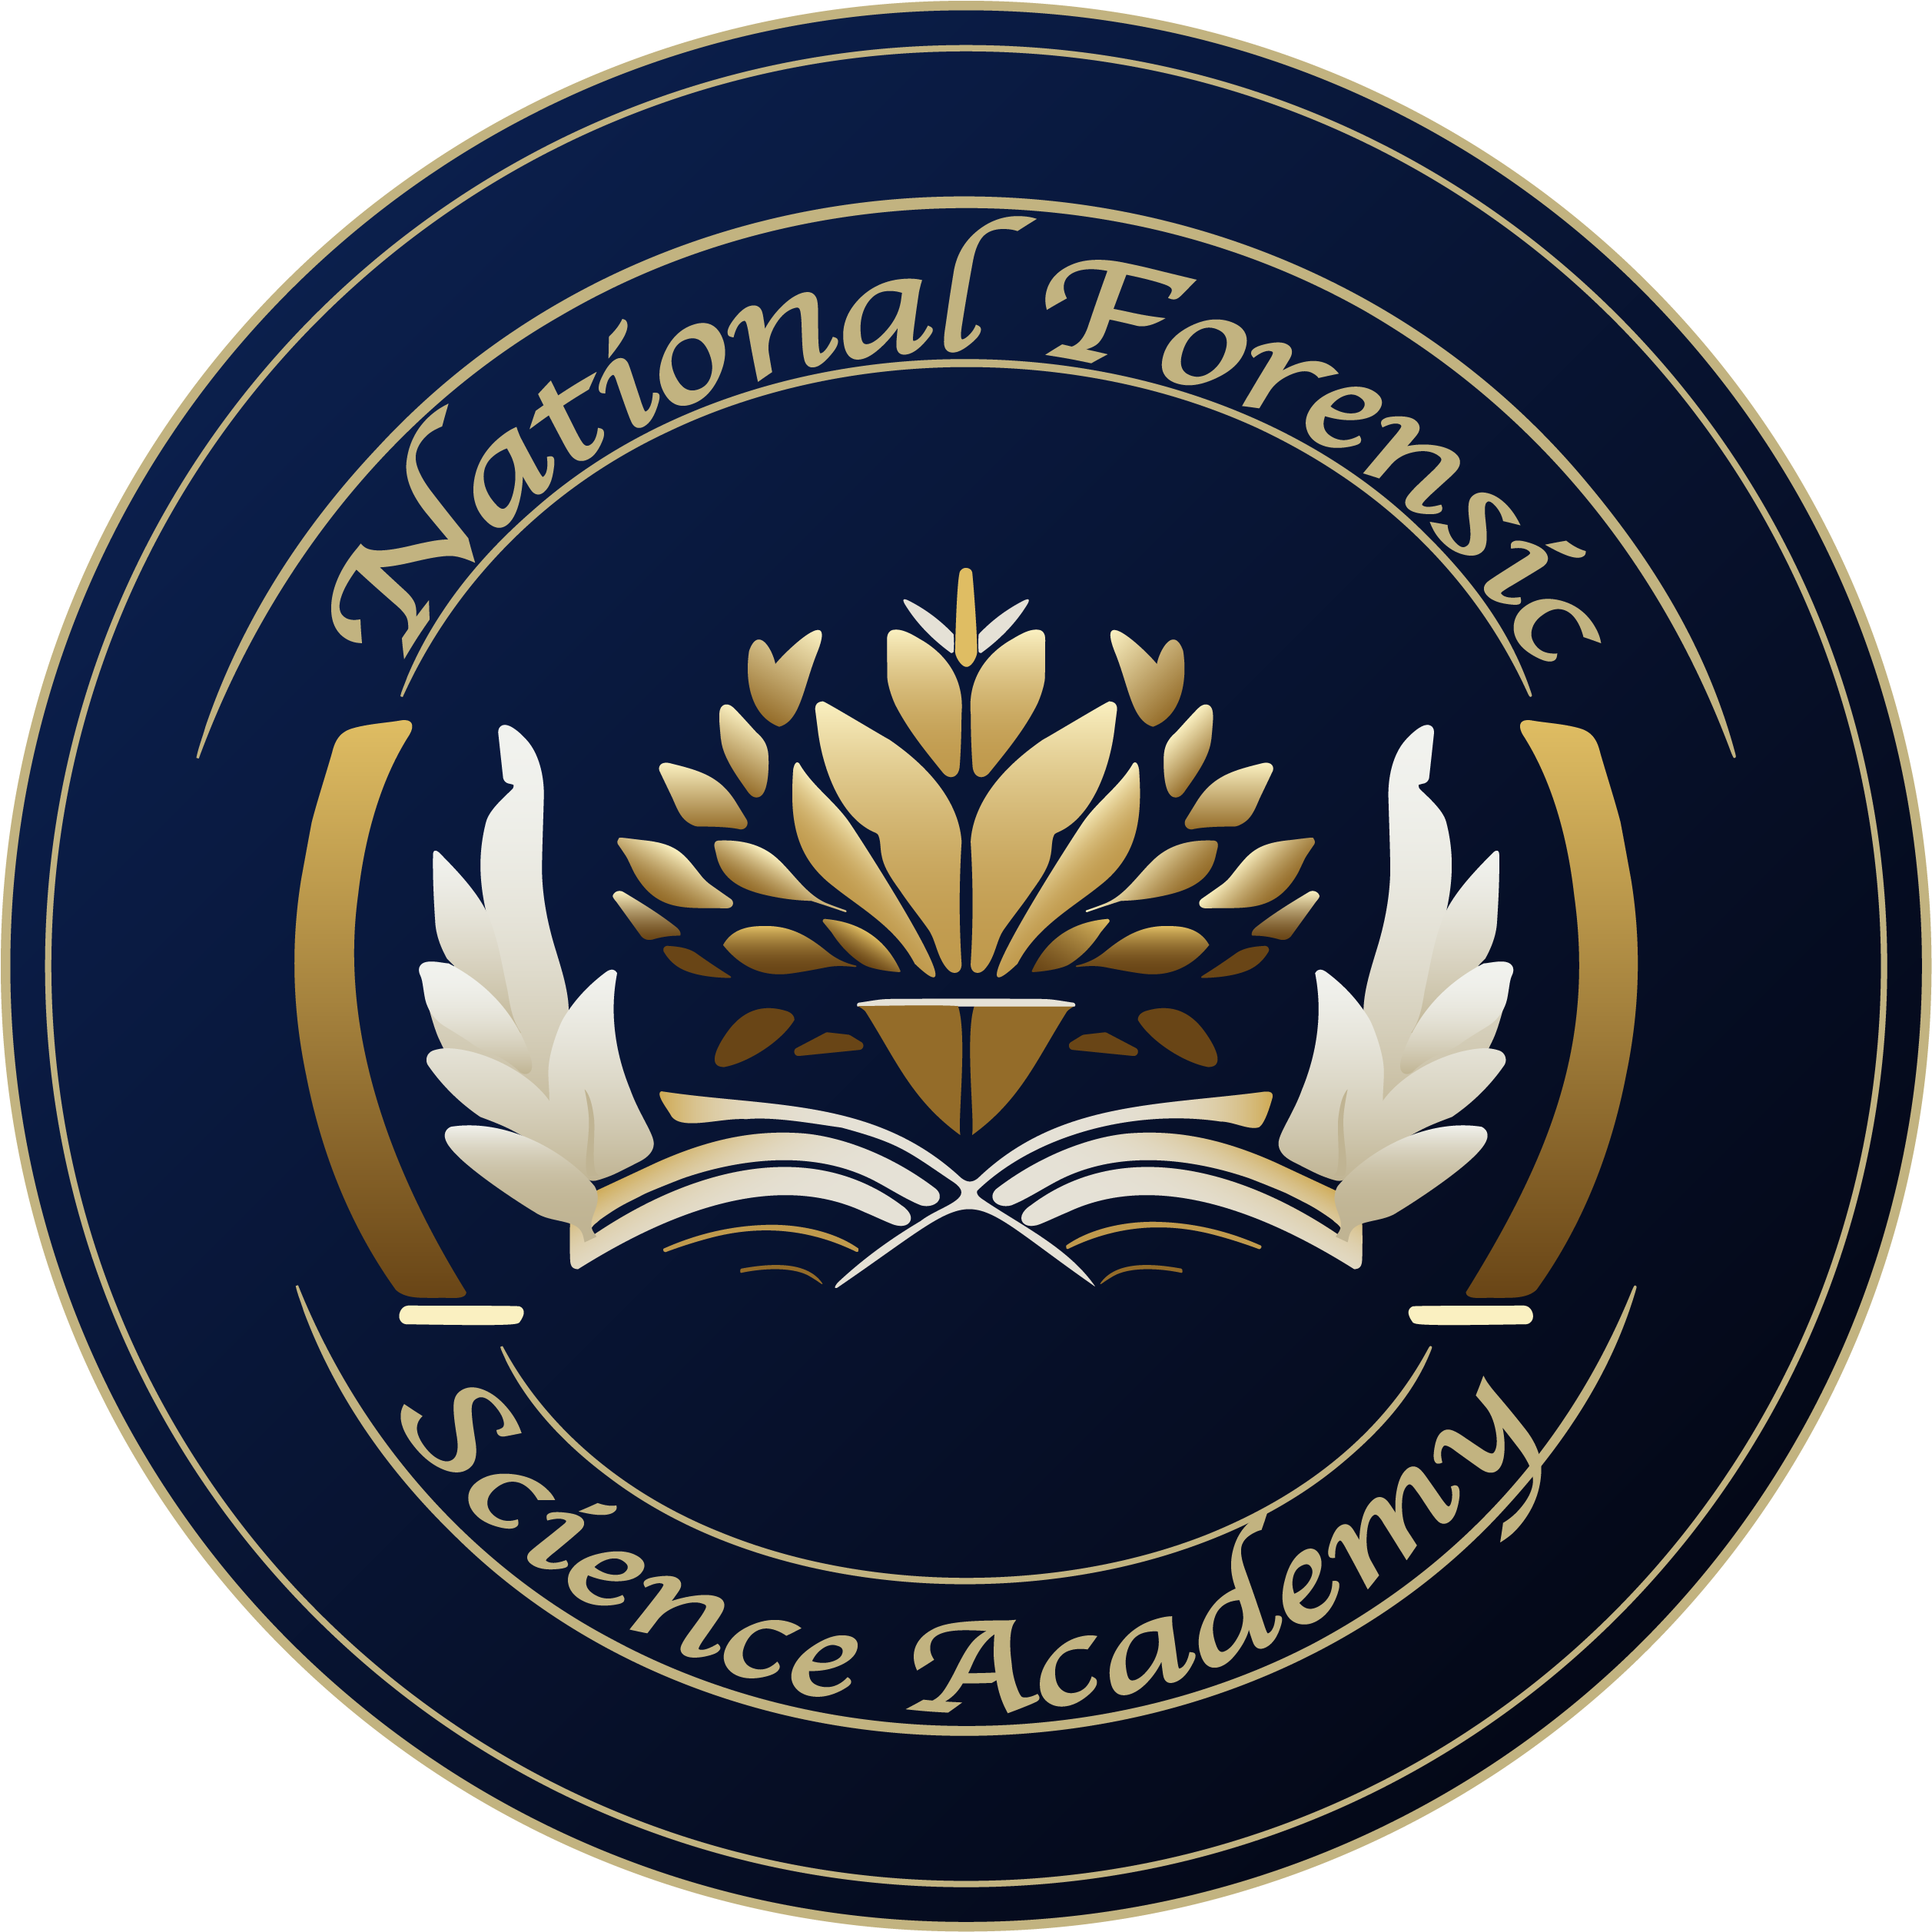 Certified Forensic Manager - I​ 